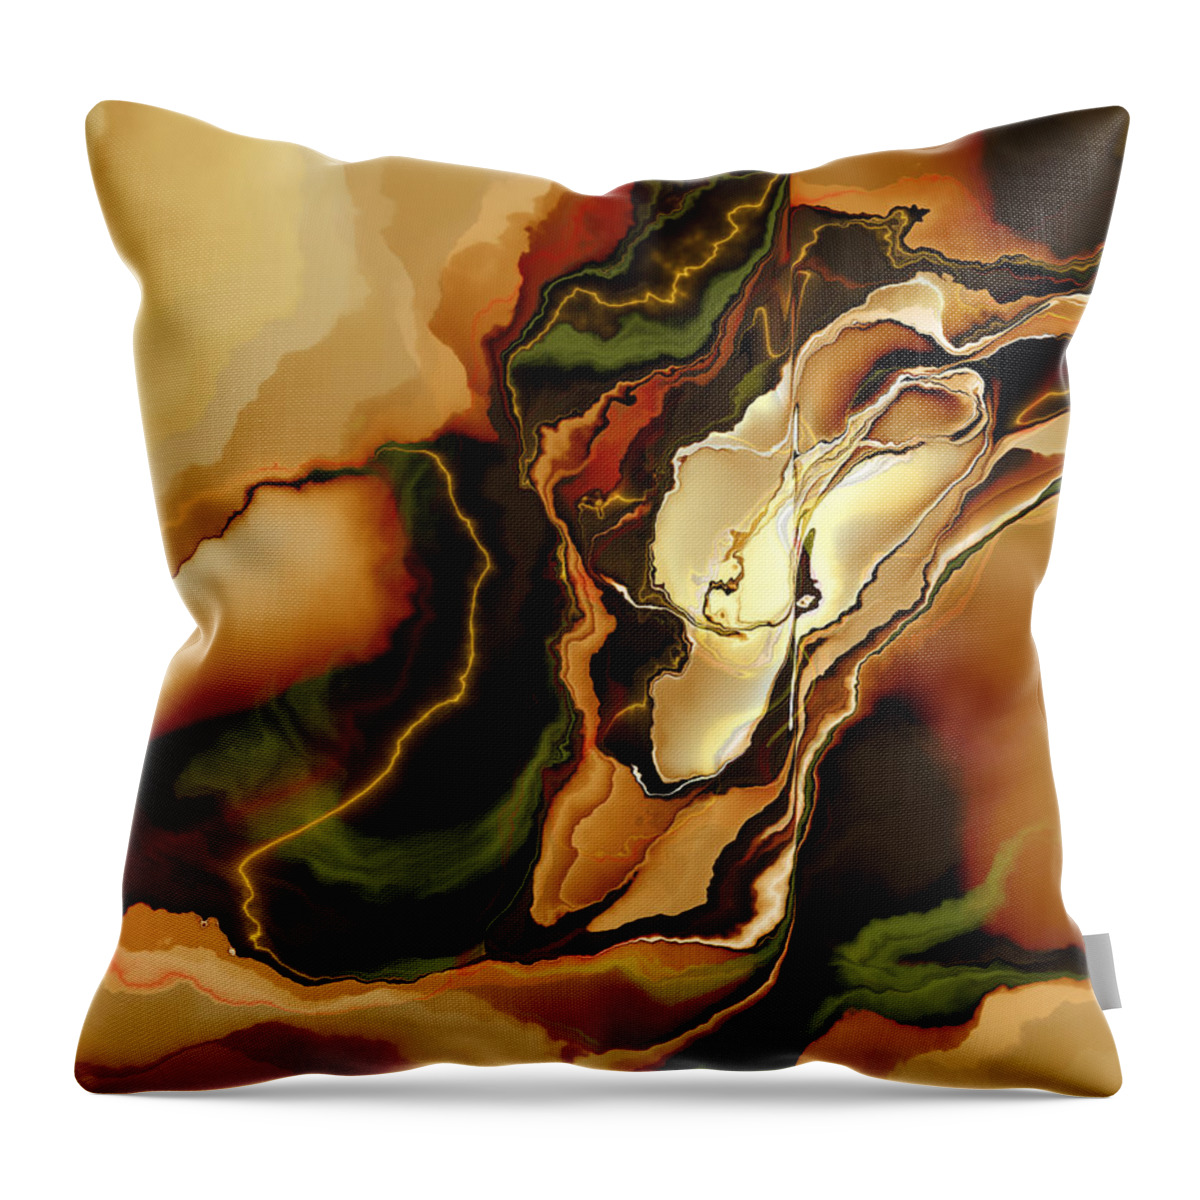 Vic Eberly Throw Pillow featuring the digital art Tenderly by Vic Eberly